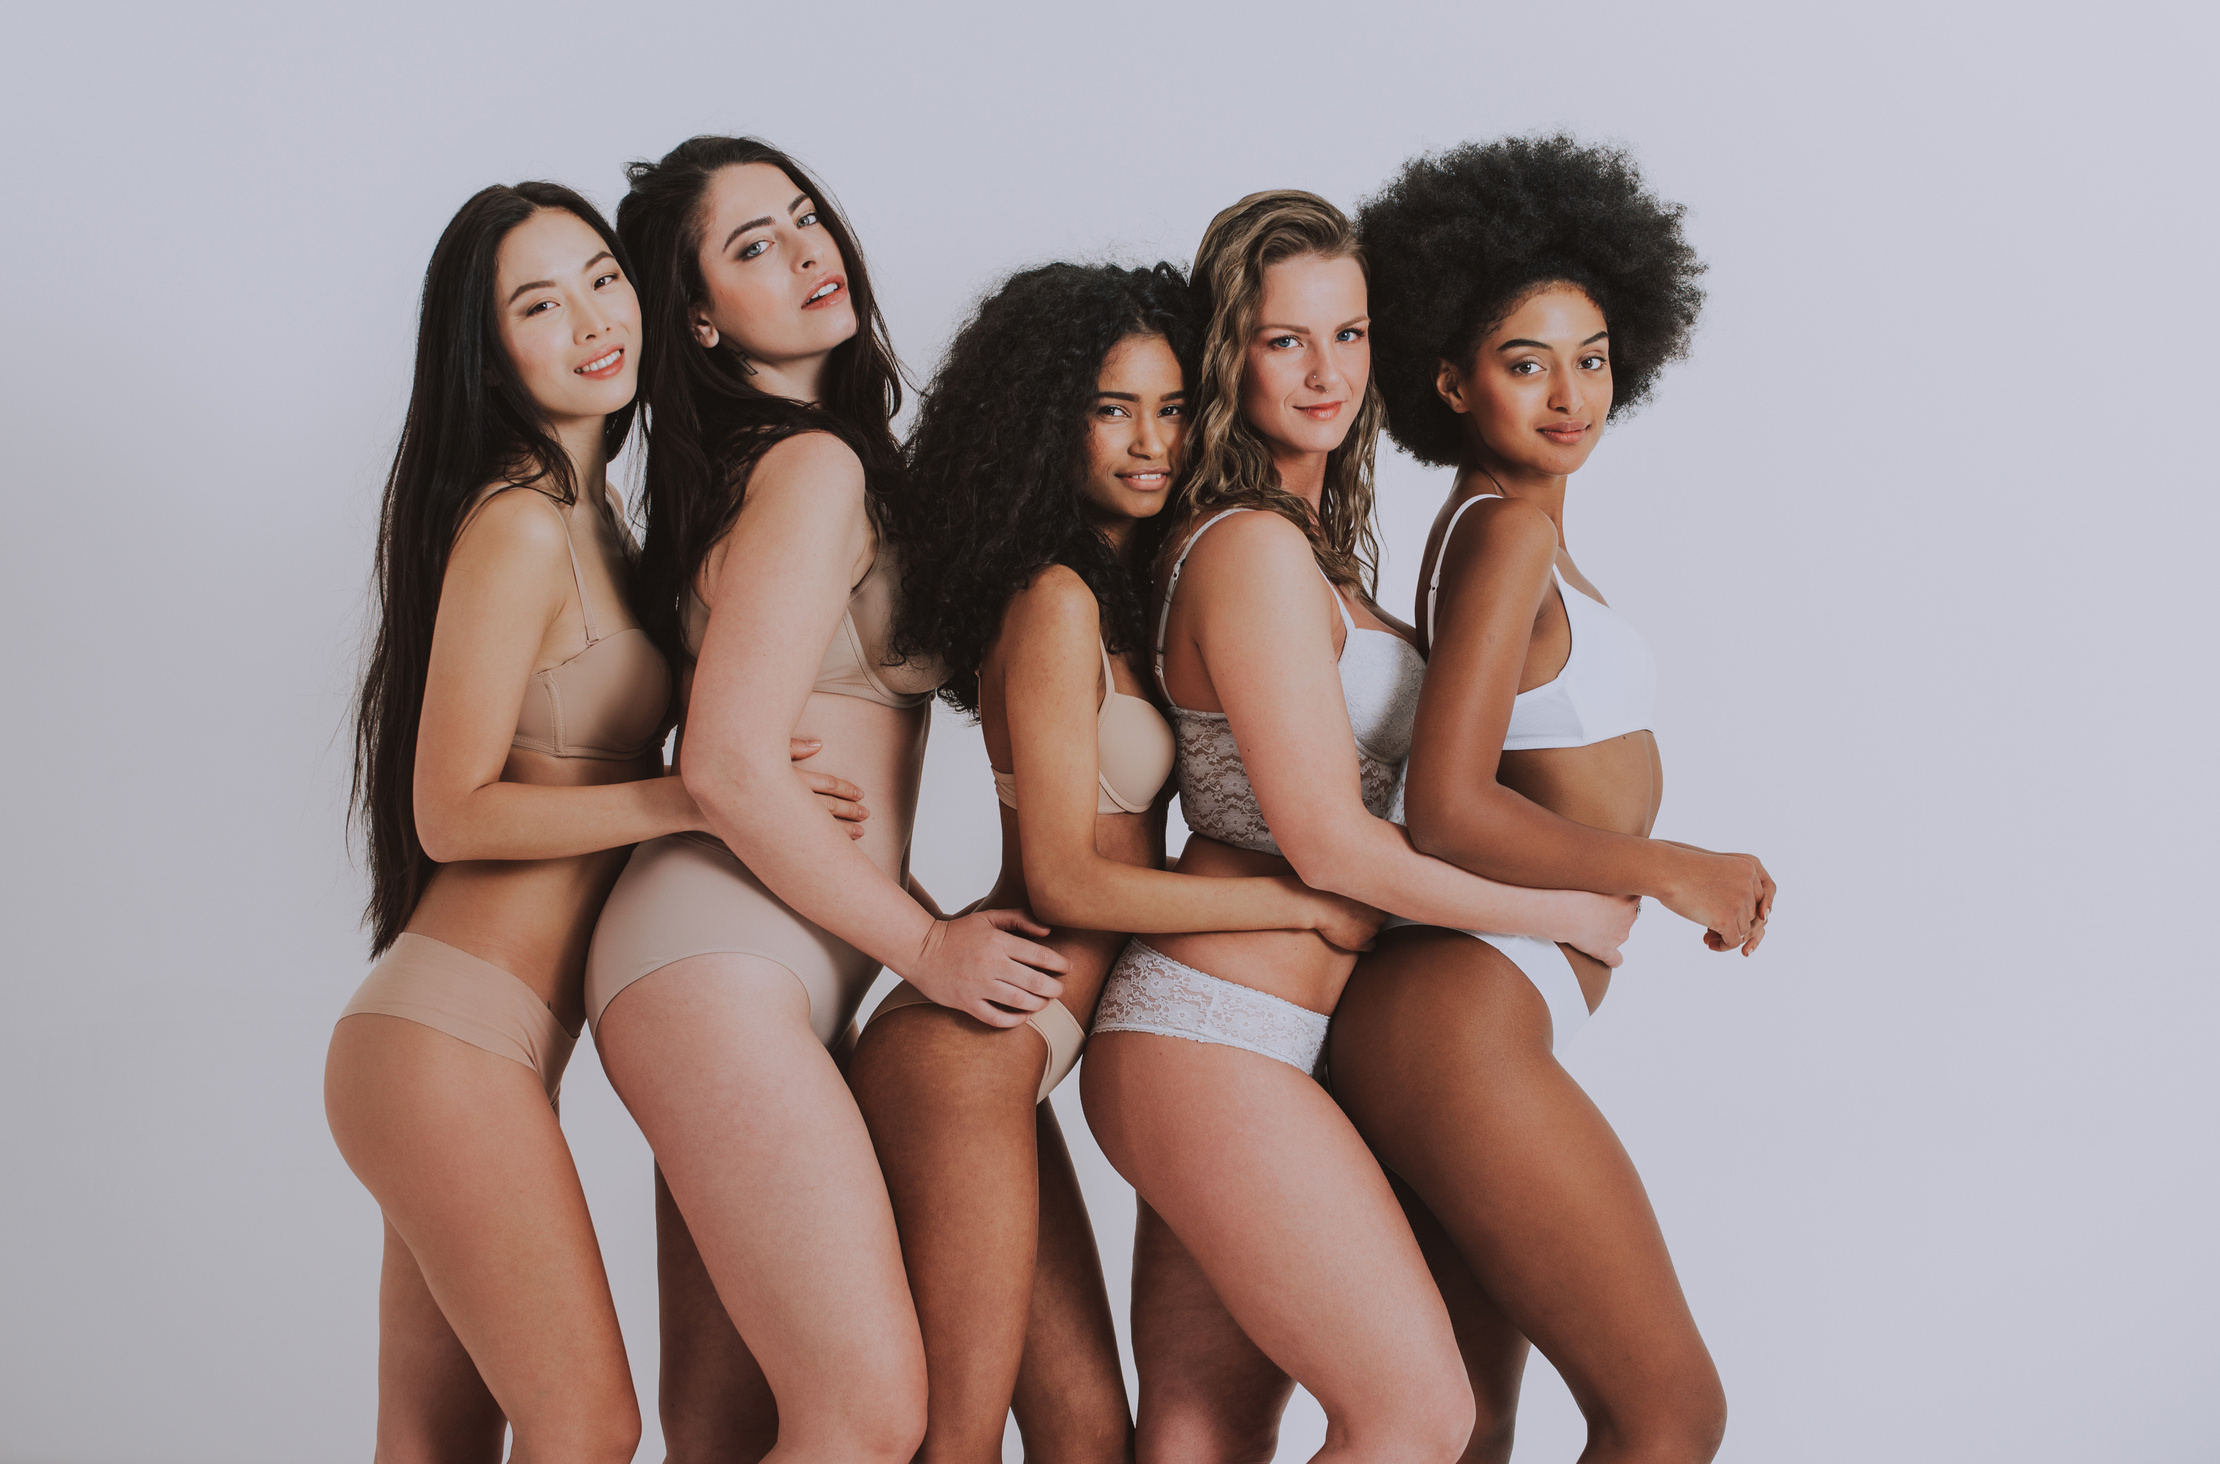 Group of Women with Different Body and Ethnicity Posing Together